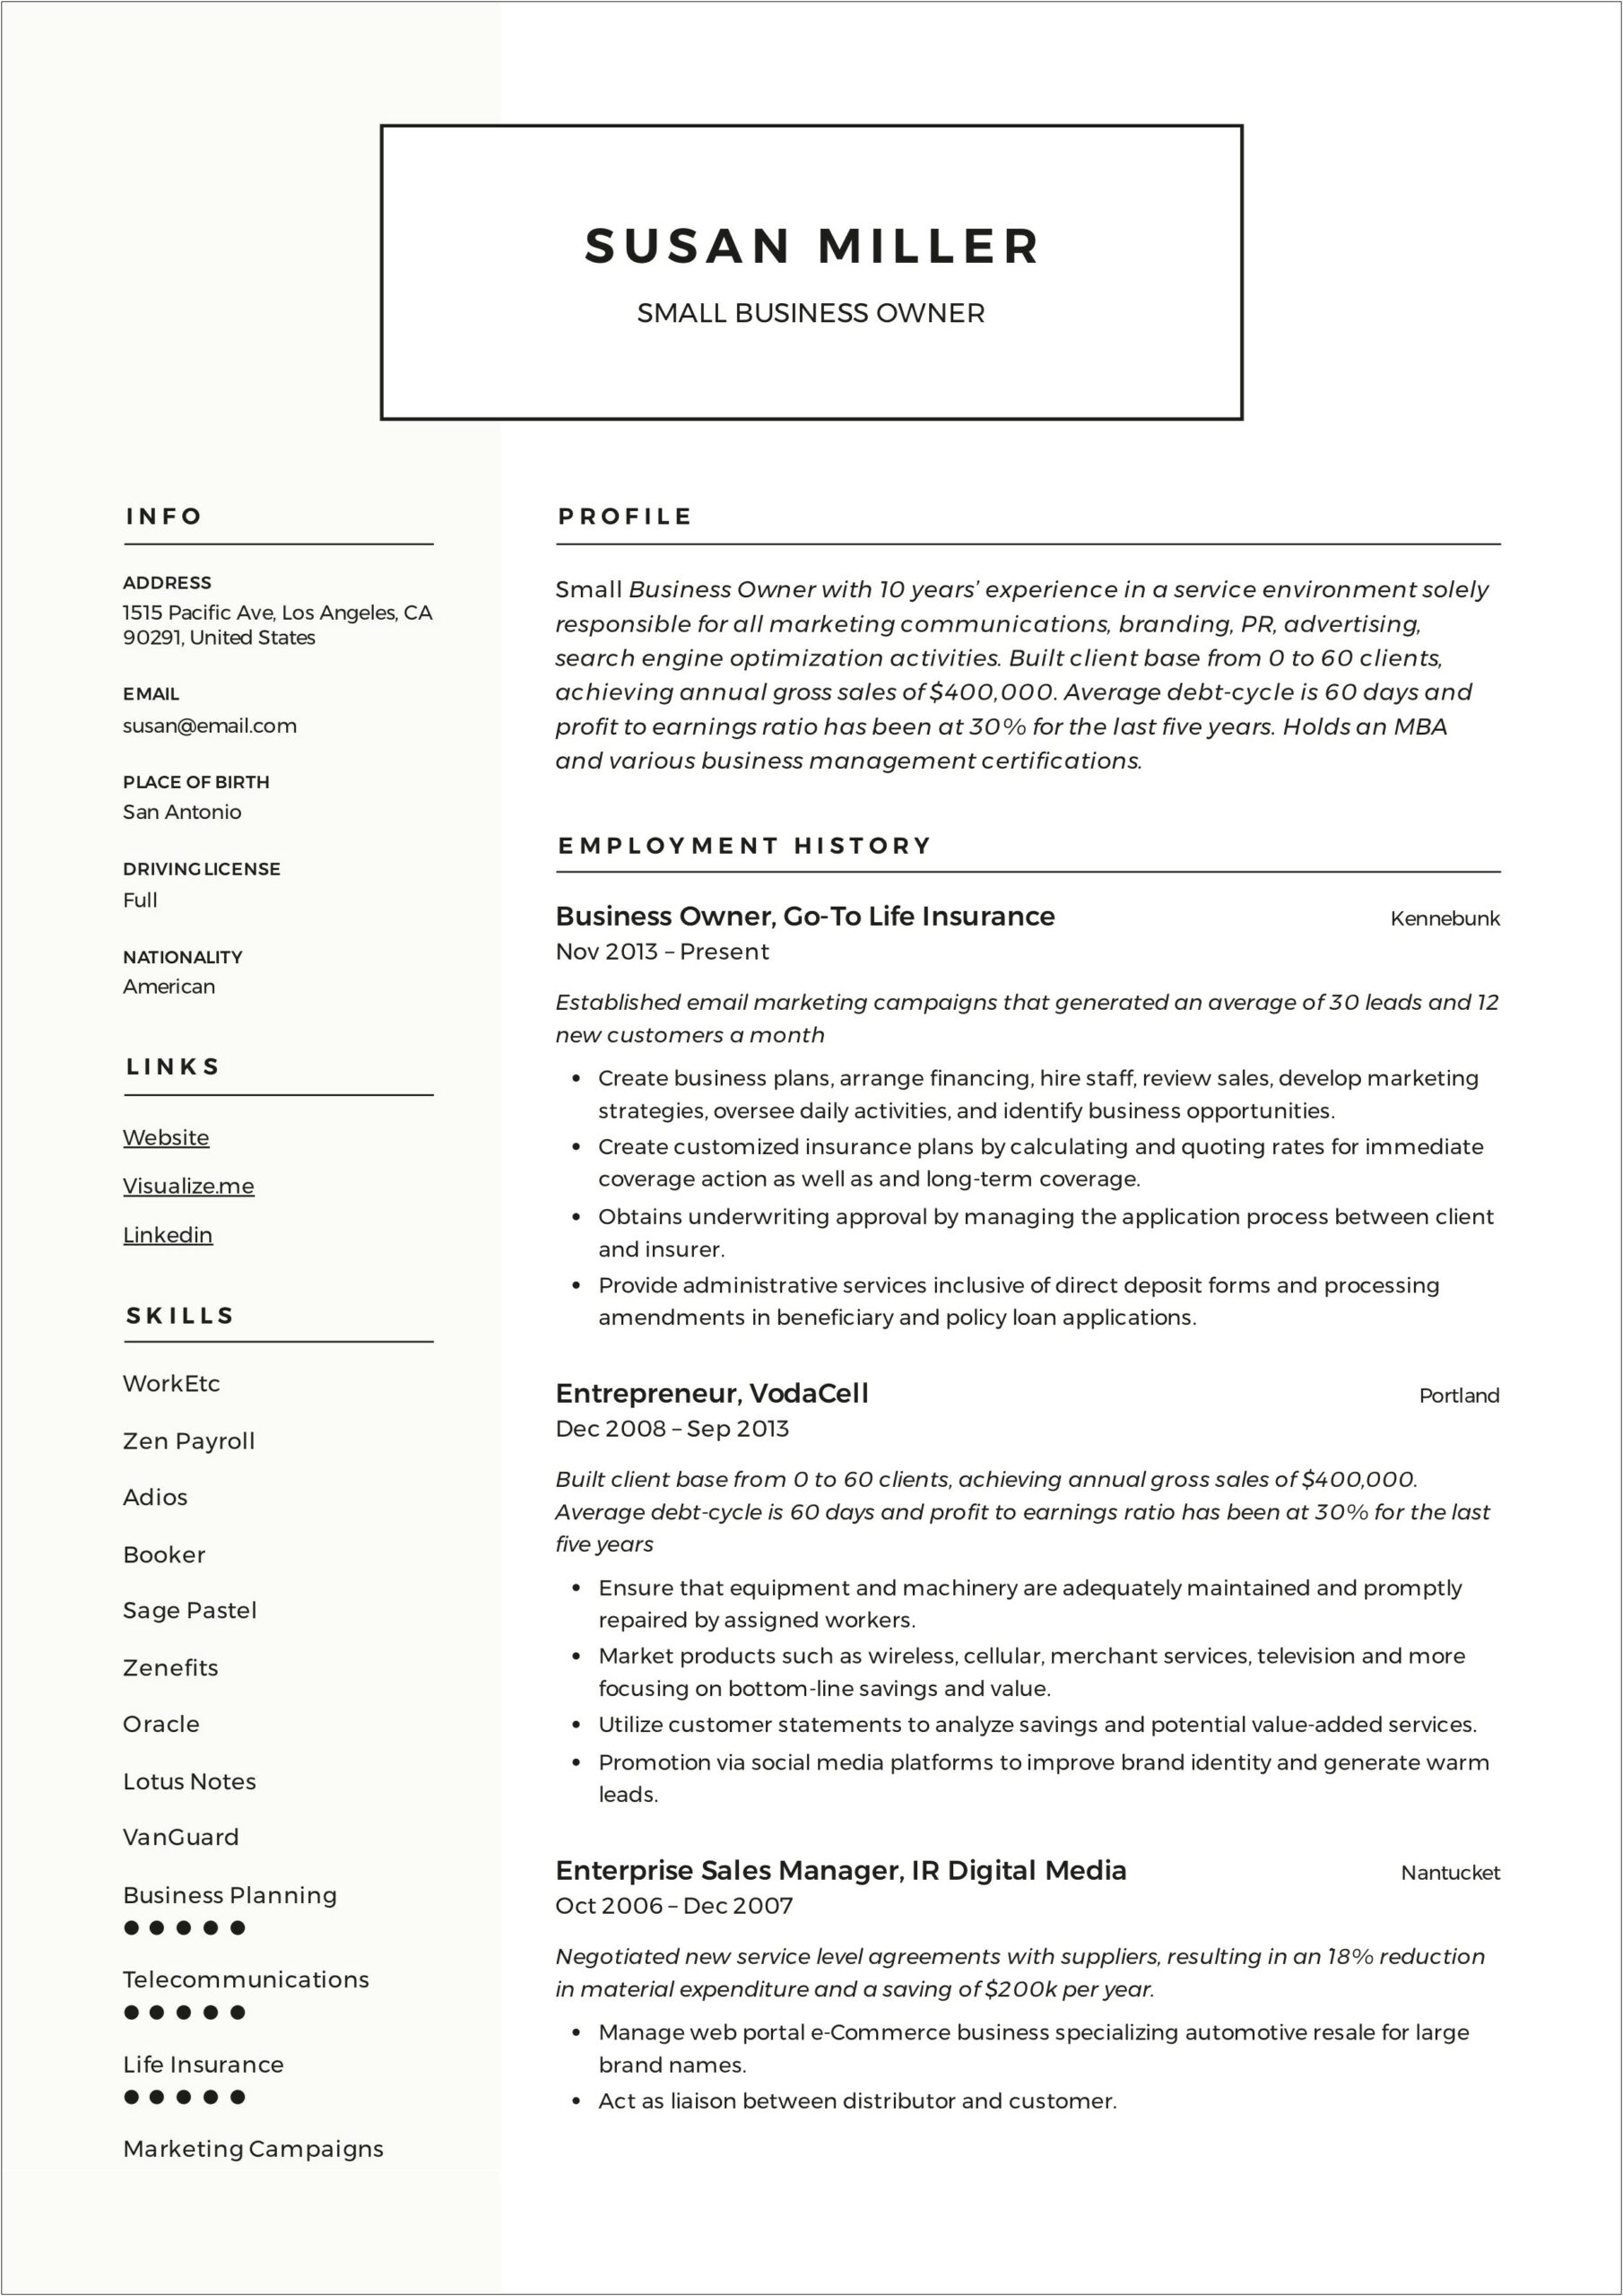 Job Title On Resume For Own Business